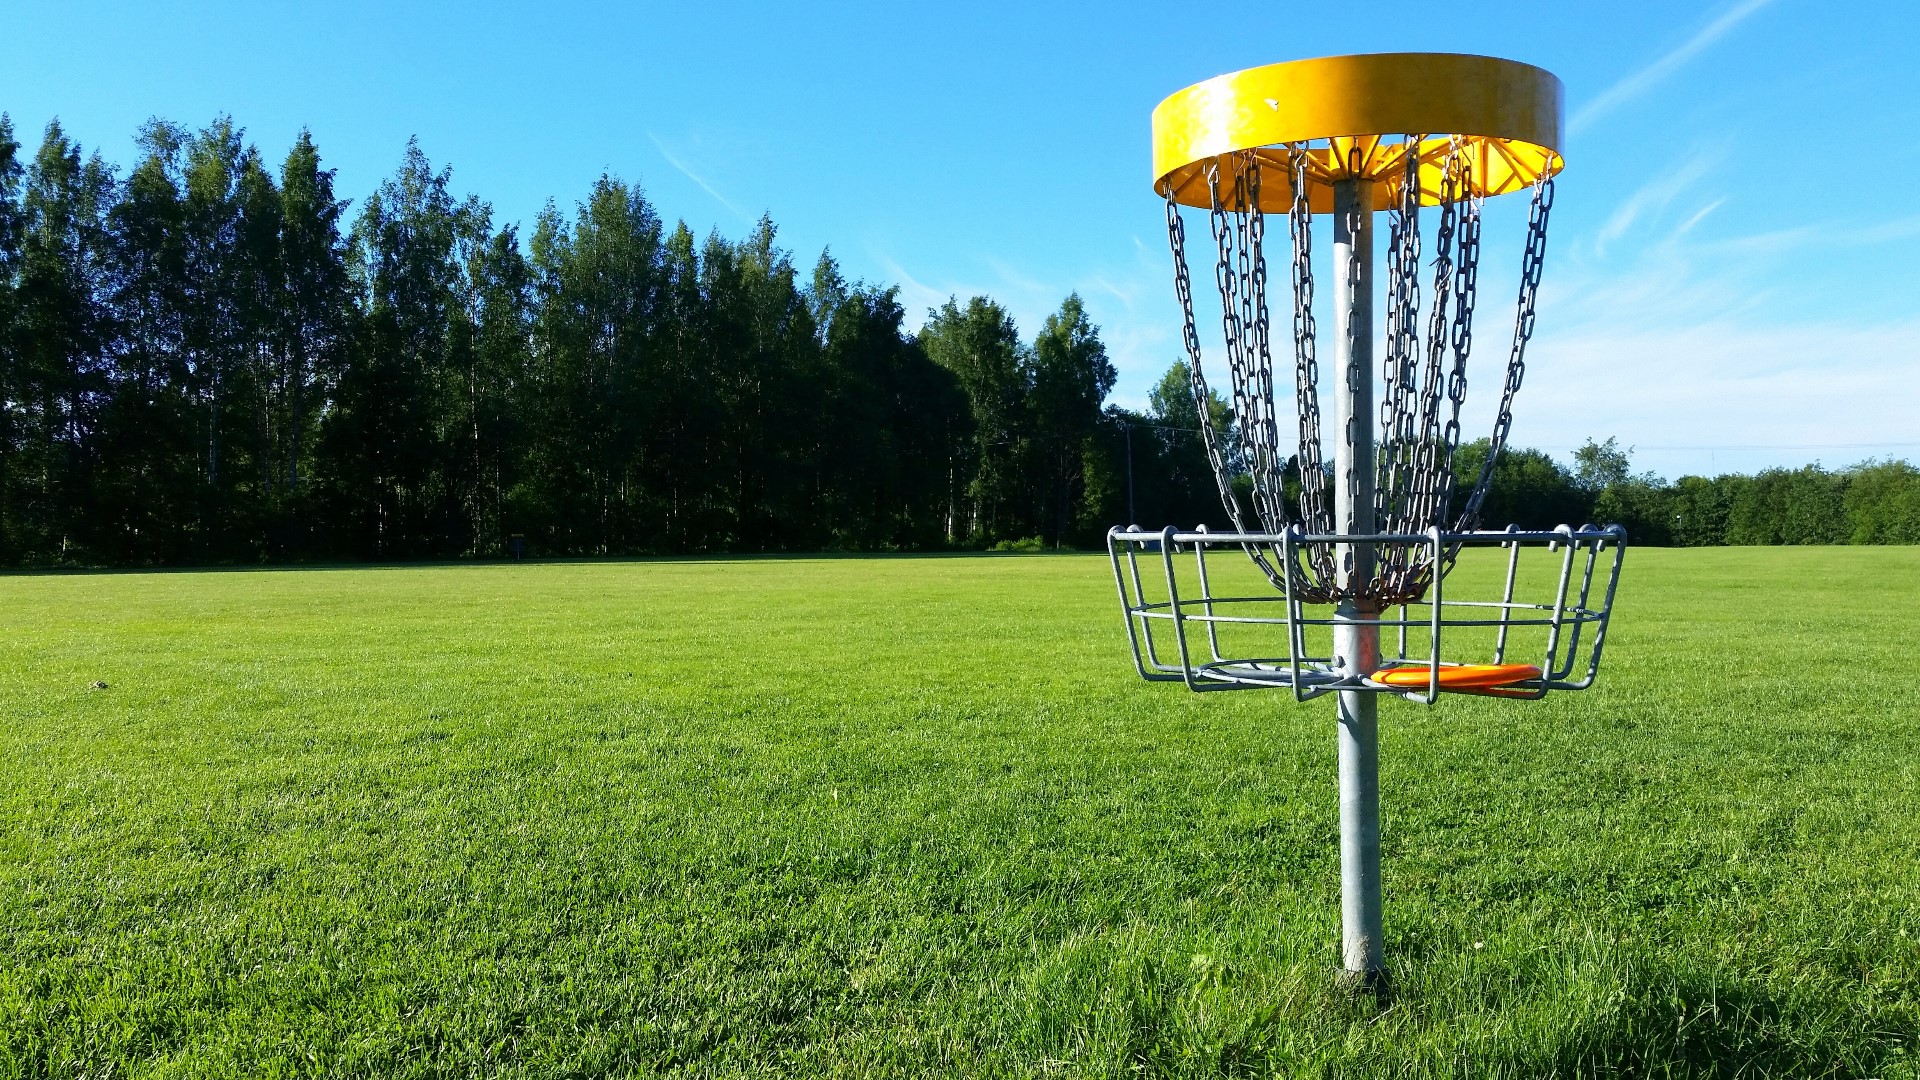 MultiGolf is a new way for family members of all ages to enjoy all varieties of the sport, including foot golf, park golf and disc golf.